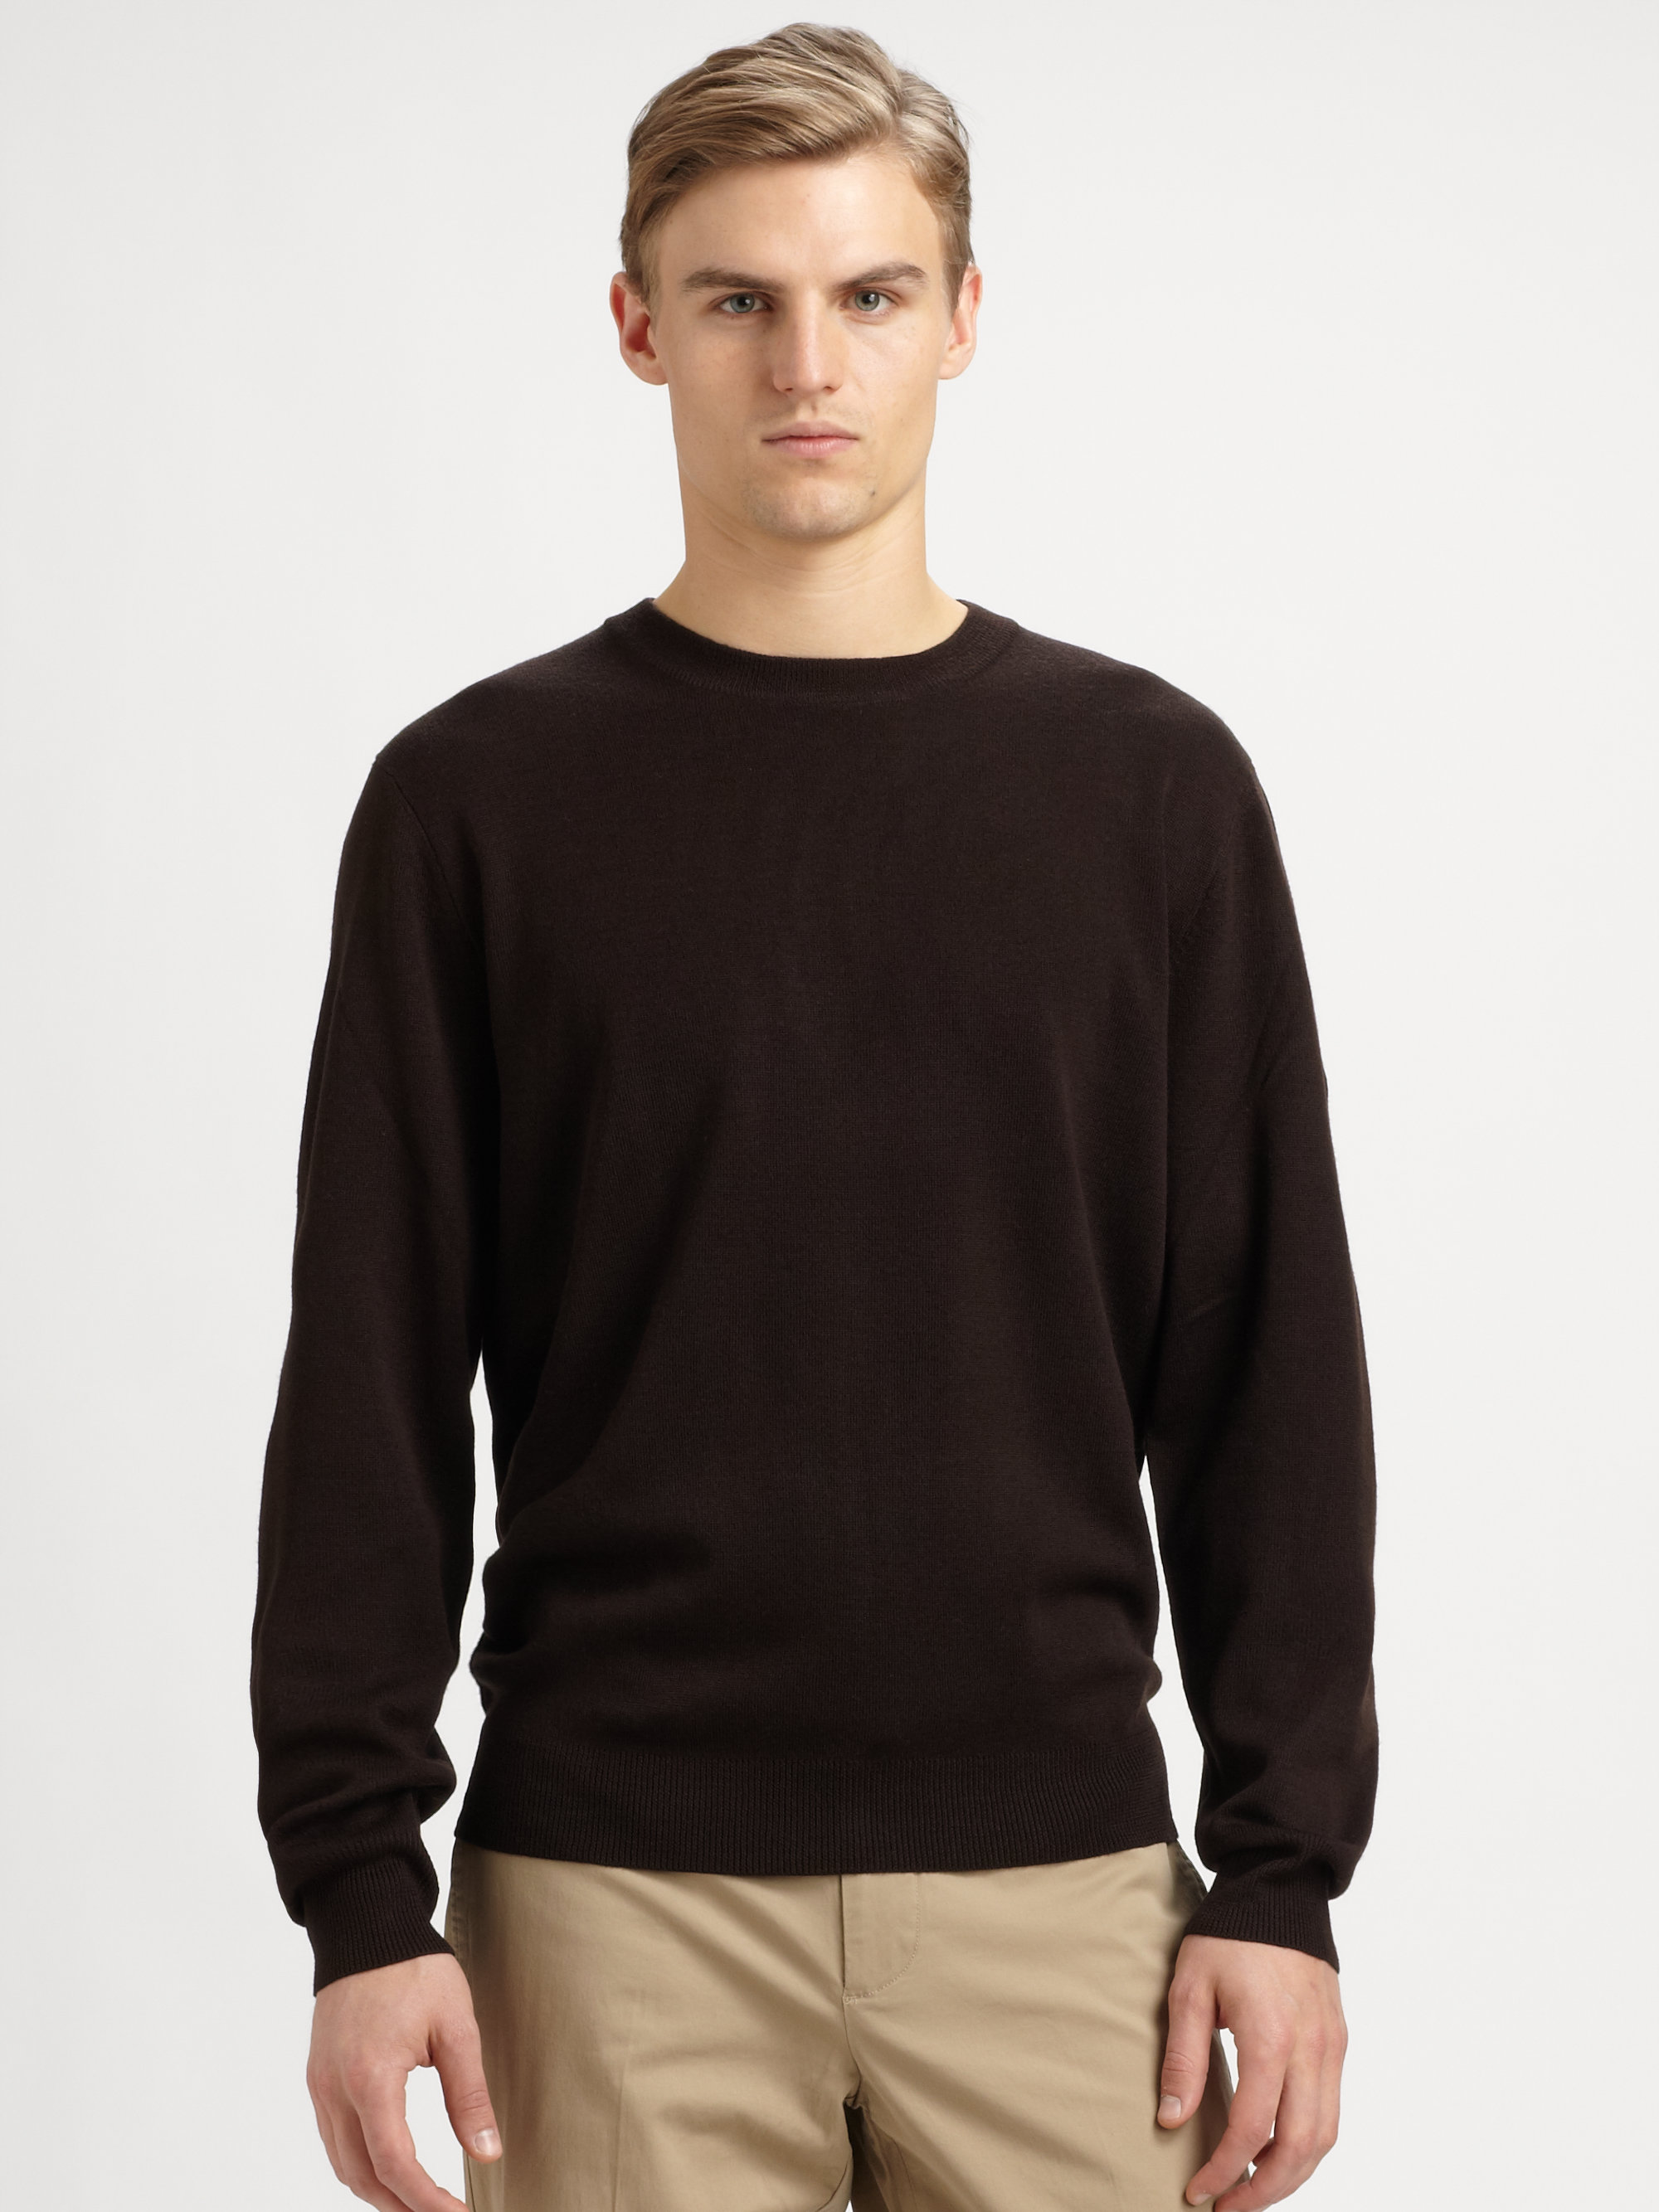 Faconnable Crewneck Sweater in Brown for Men | Lyst